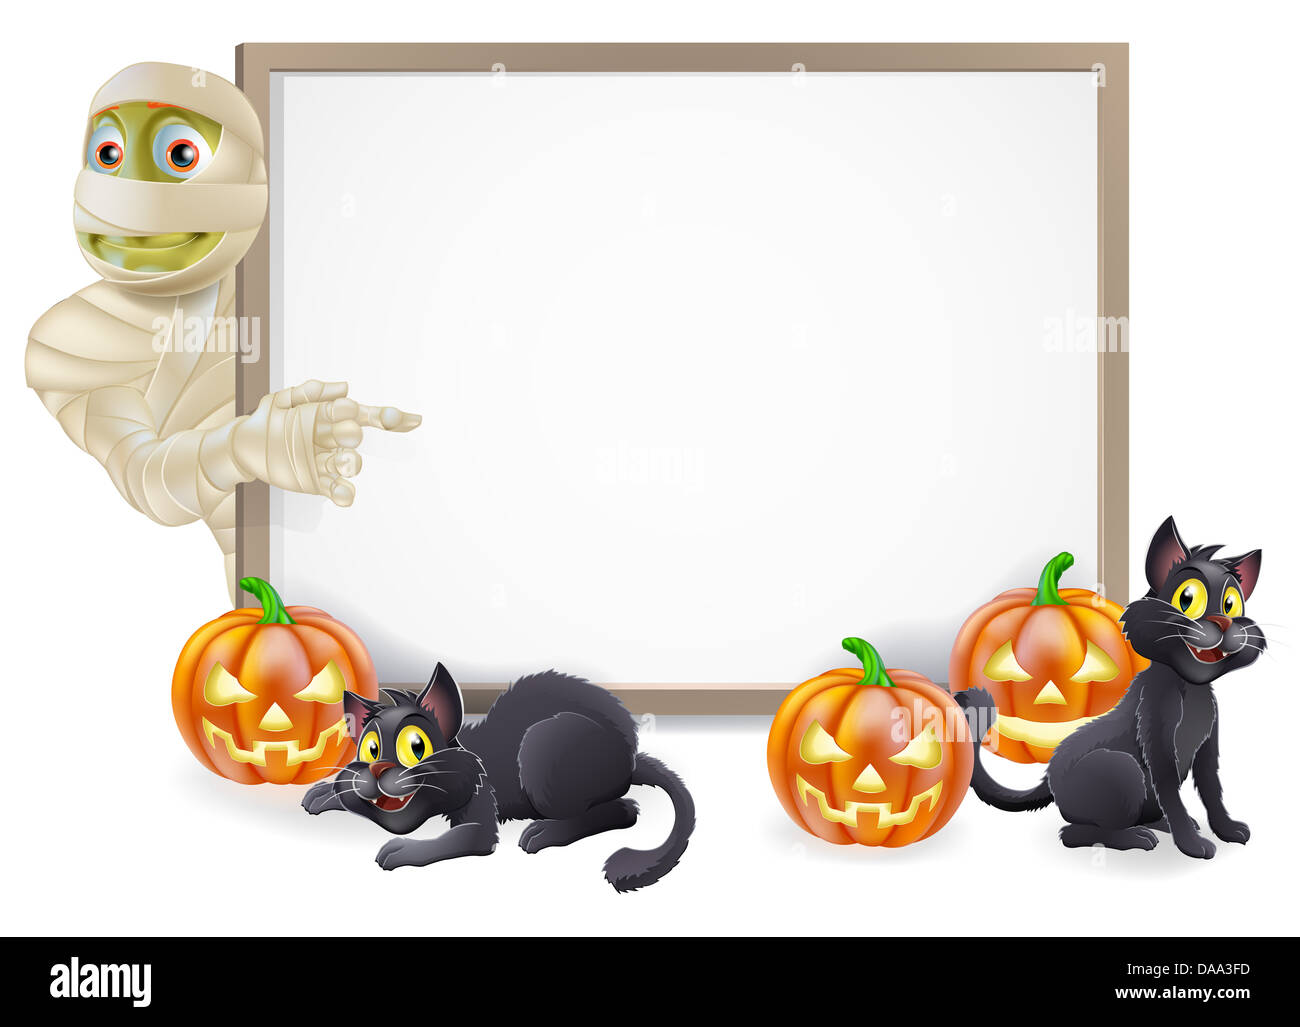 Halloween sign or banner with orange Halloween pumpkins and cartoon Egyptian mummy character Stock Photo